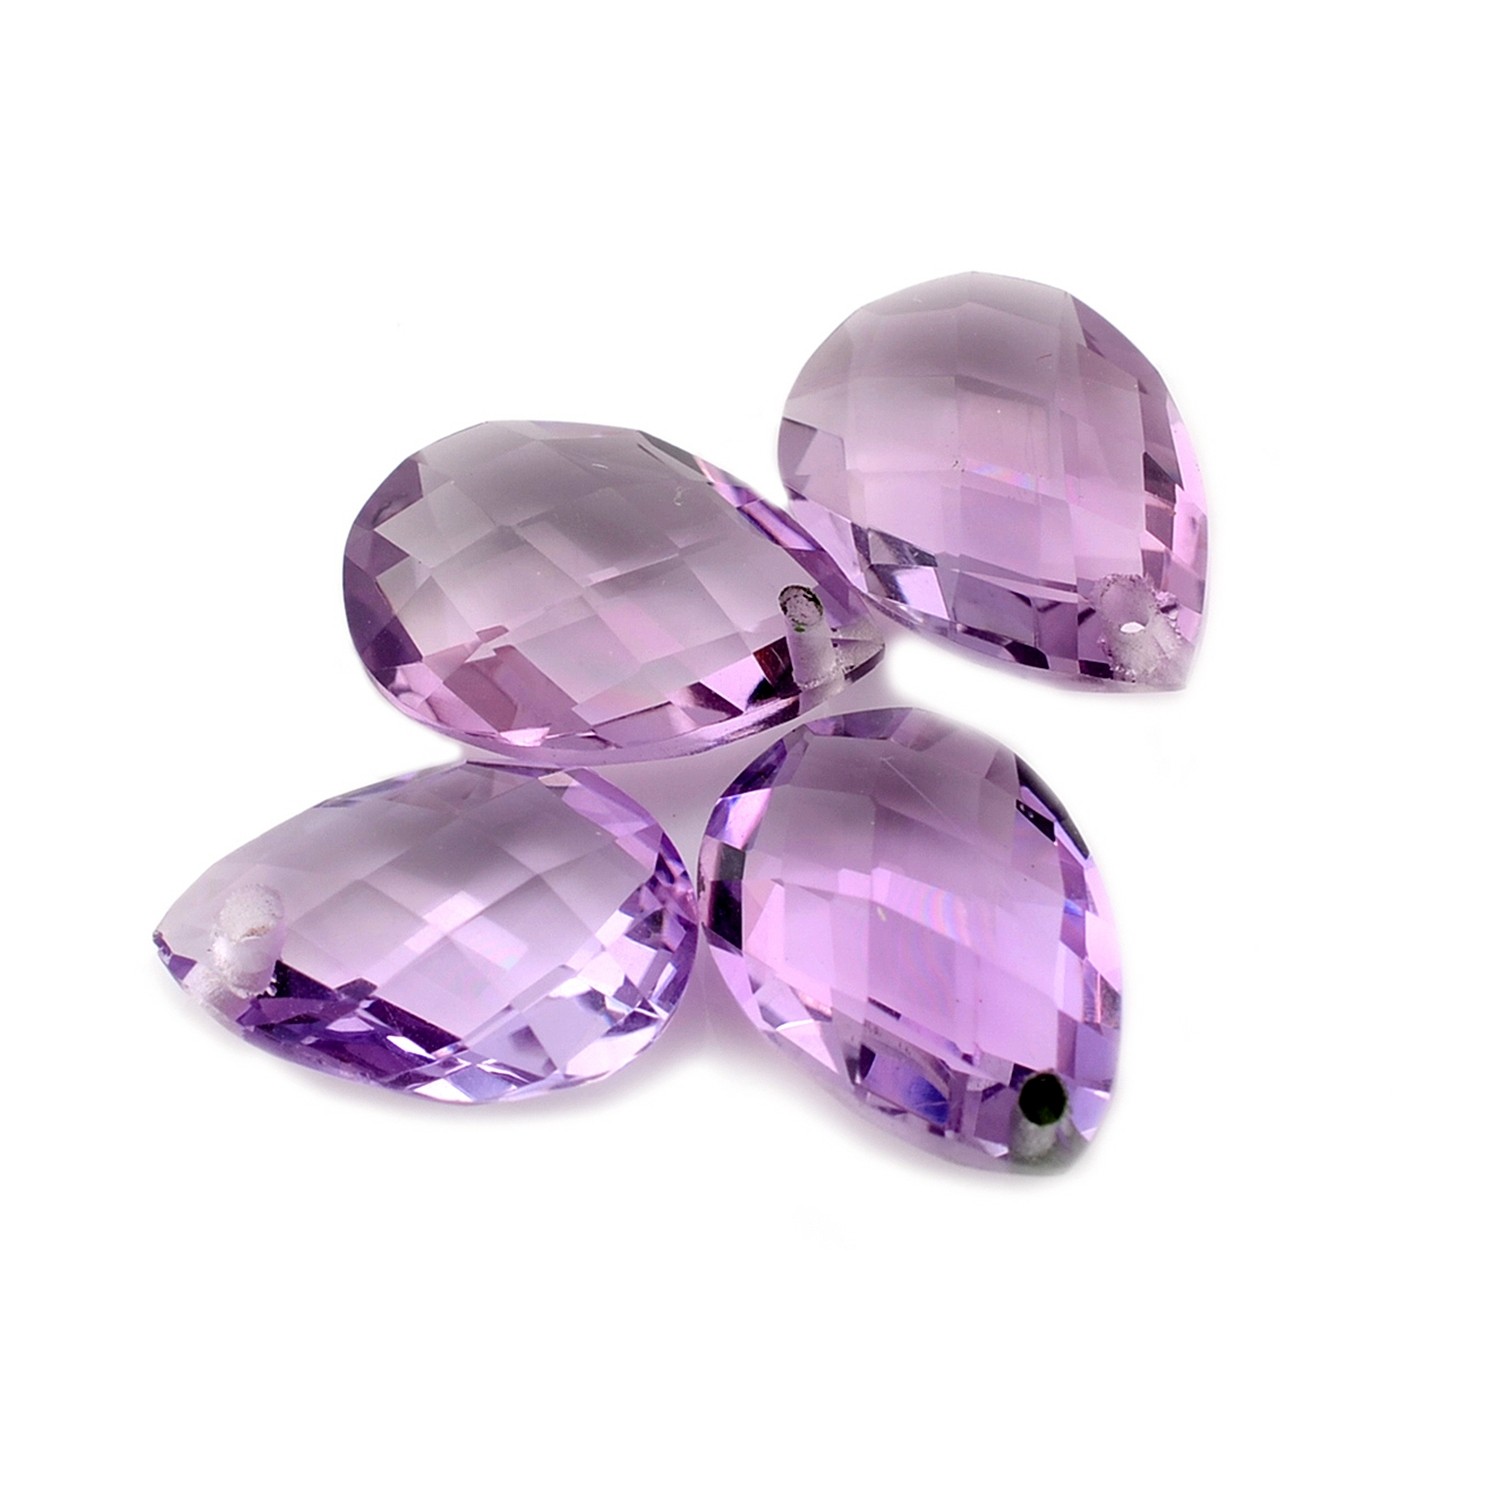 Faceted Set of 12 Amethyst Pear Briolettes 11-12 mm